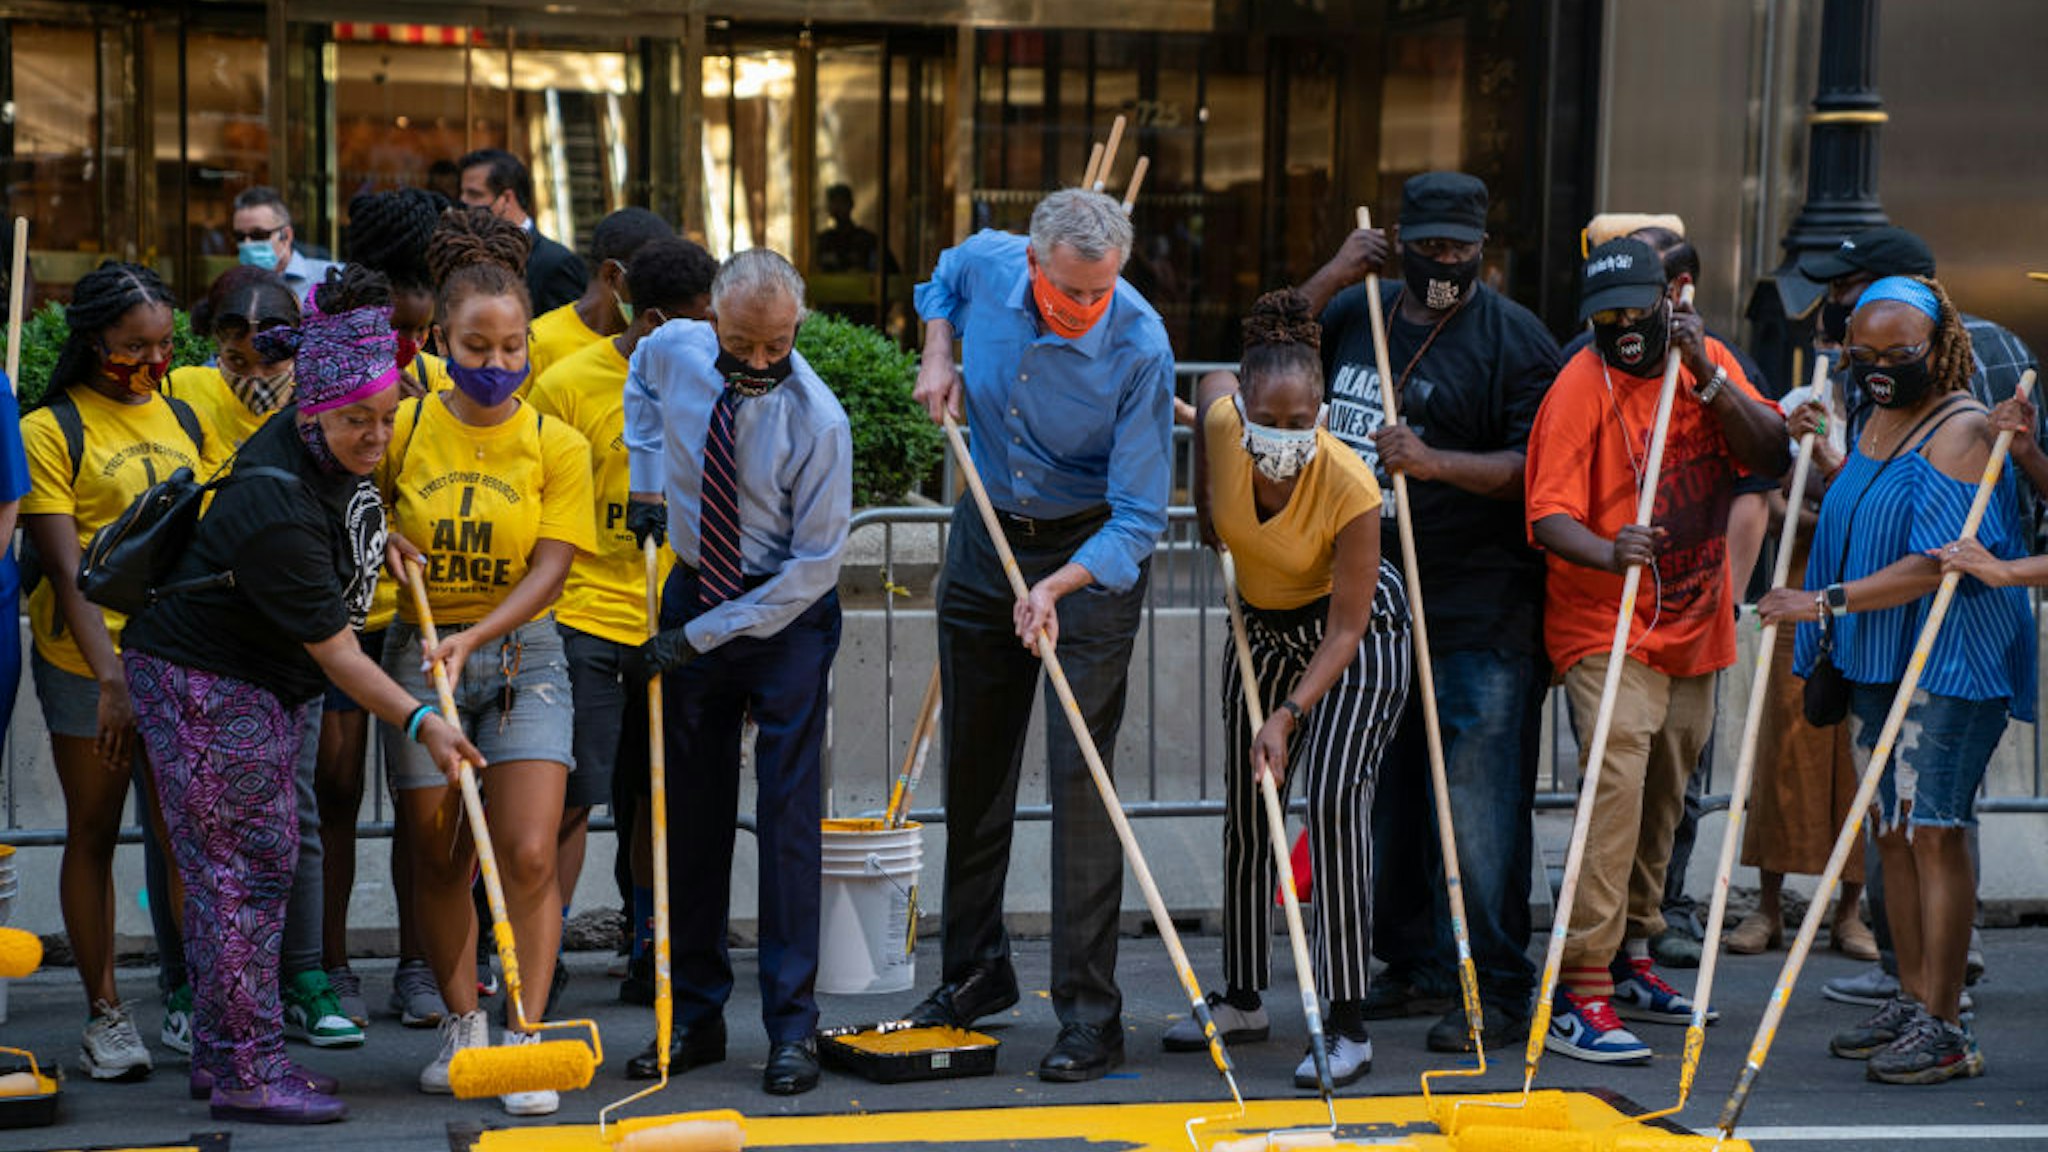 New York City Mayor Bill de Blasio, his wife Chirlane McCray and Rev. Al Sharpton help paint a Black Lives Matter mural on Fifth Avenue directly in front of Trump Tower on July 9, 2020 in New York City.